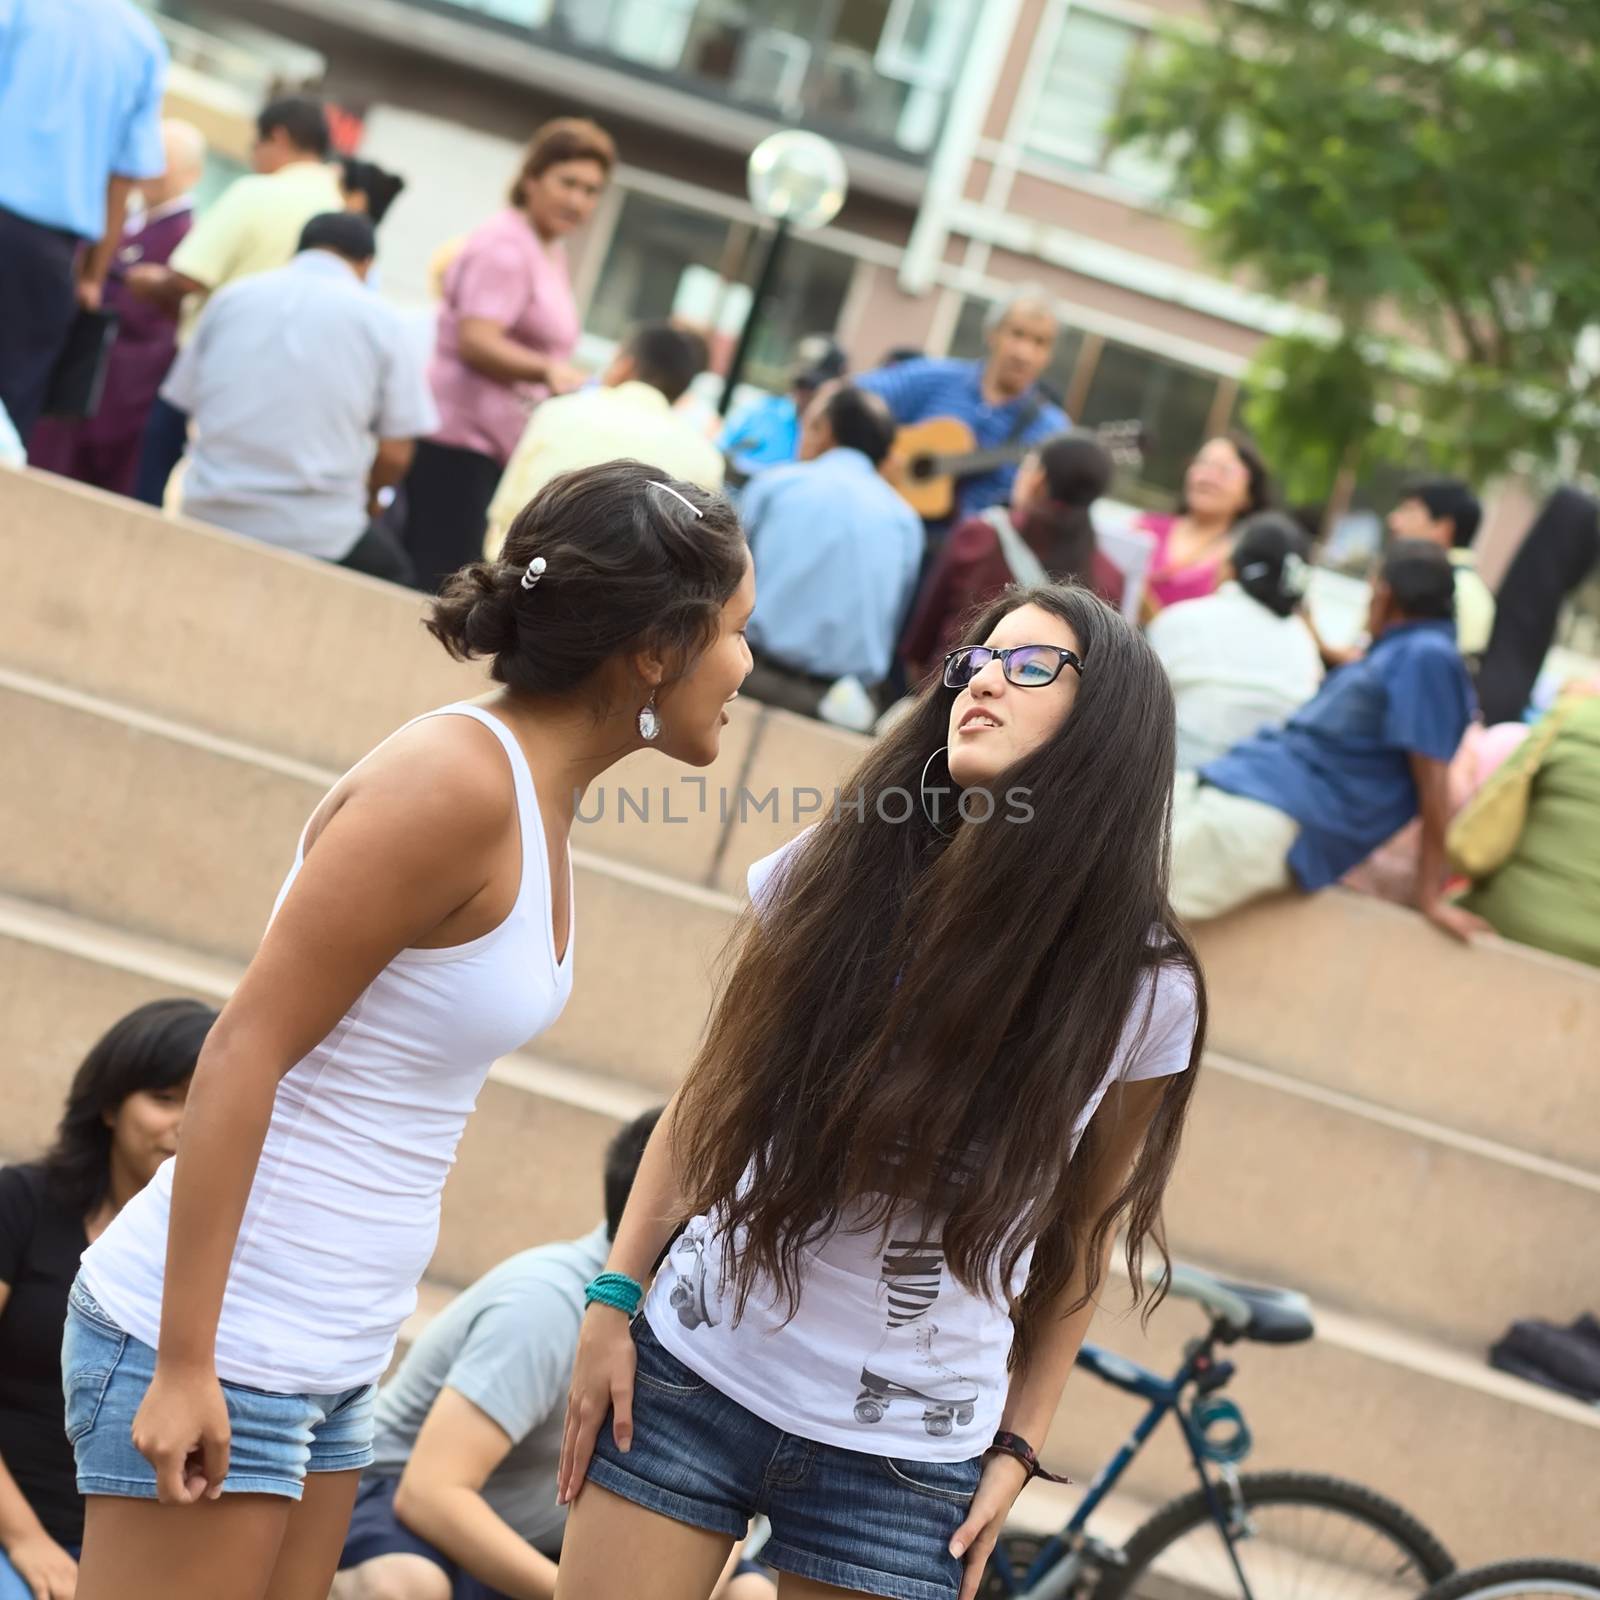 LIMA, PERU - MARCH 6, 2012: Unidentified young women playing improvisation in the amphitheatre of the Kennedy Park in Miraflores on March 6, 2012 in Lima, Peru. 